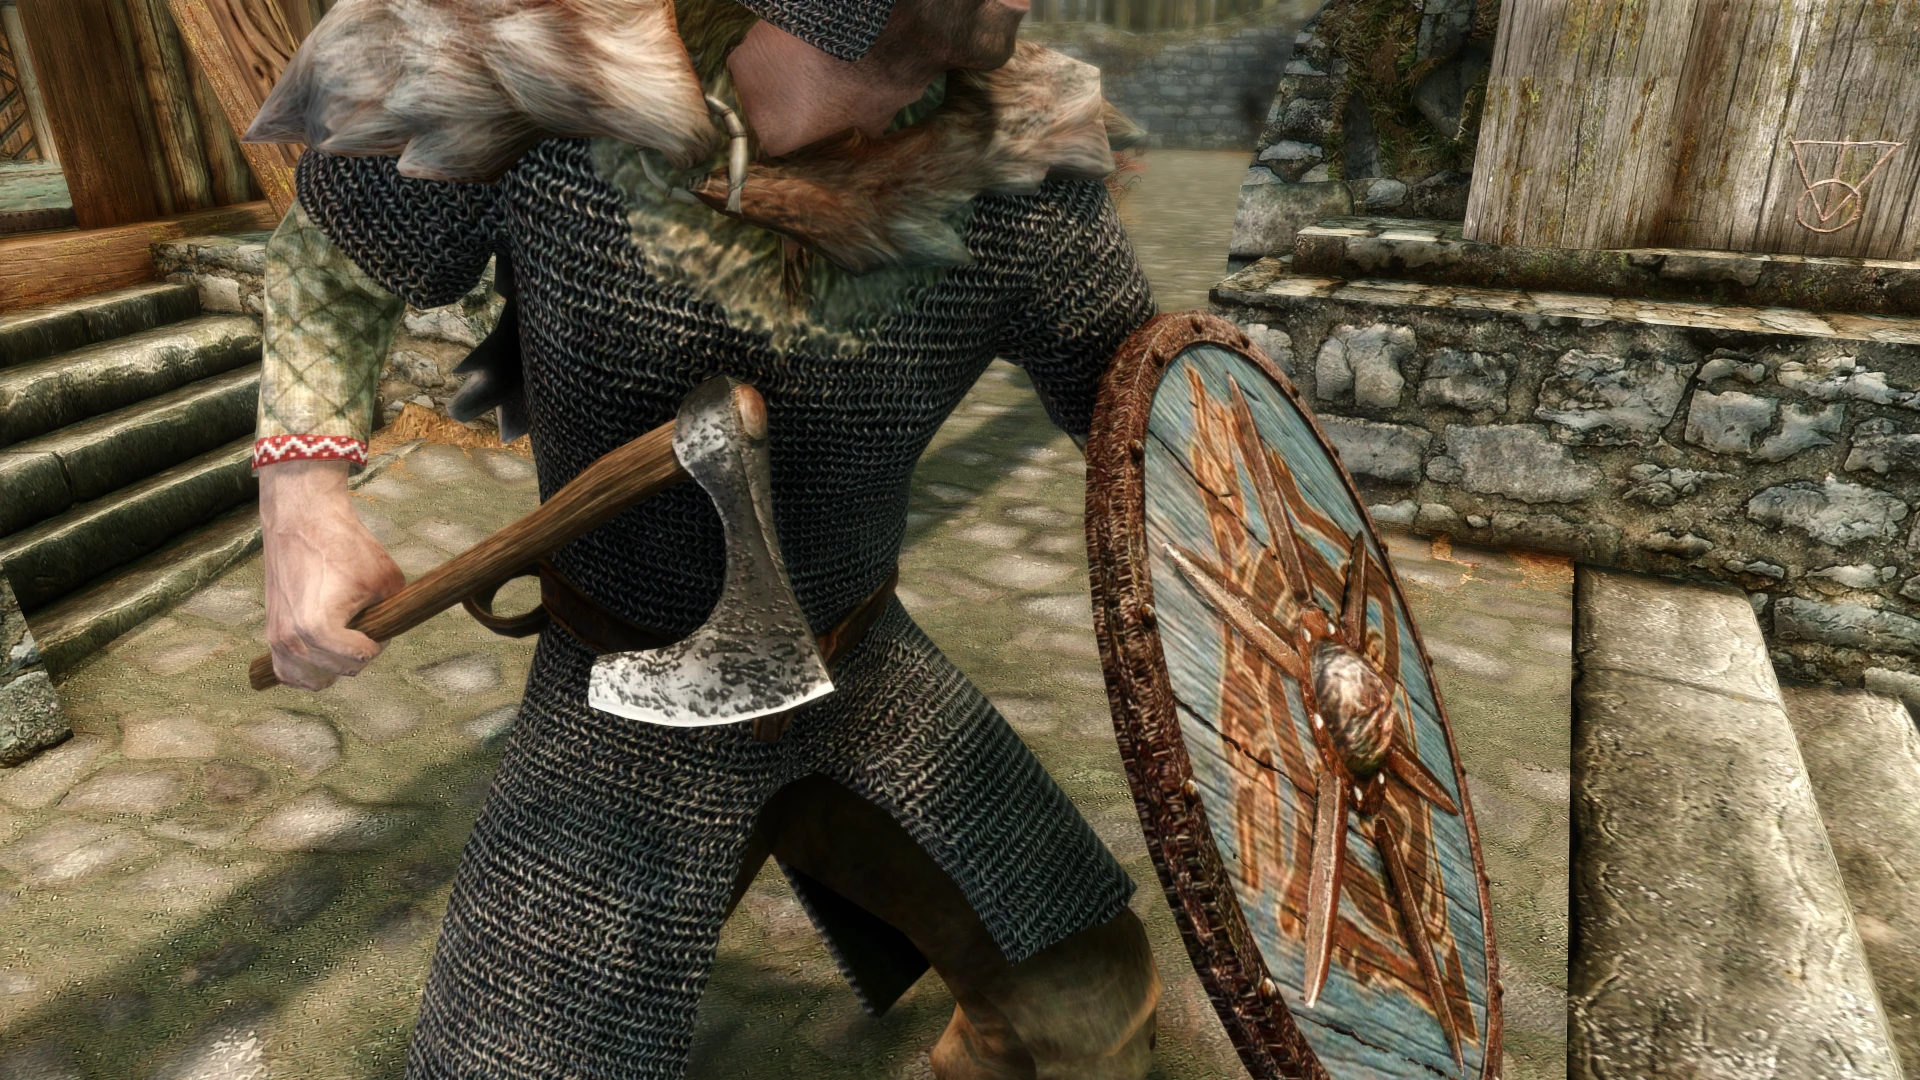 vikings weapons and armor at Skyrim Nexus - Mods and Community